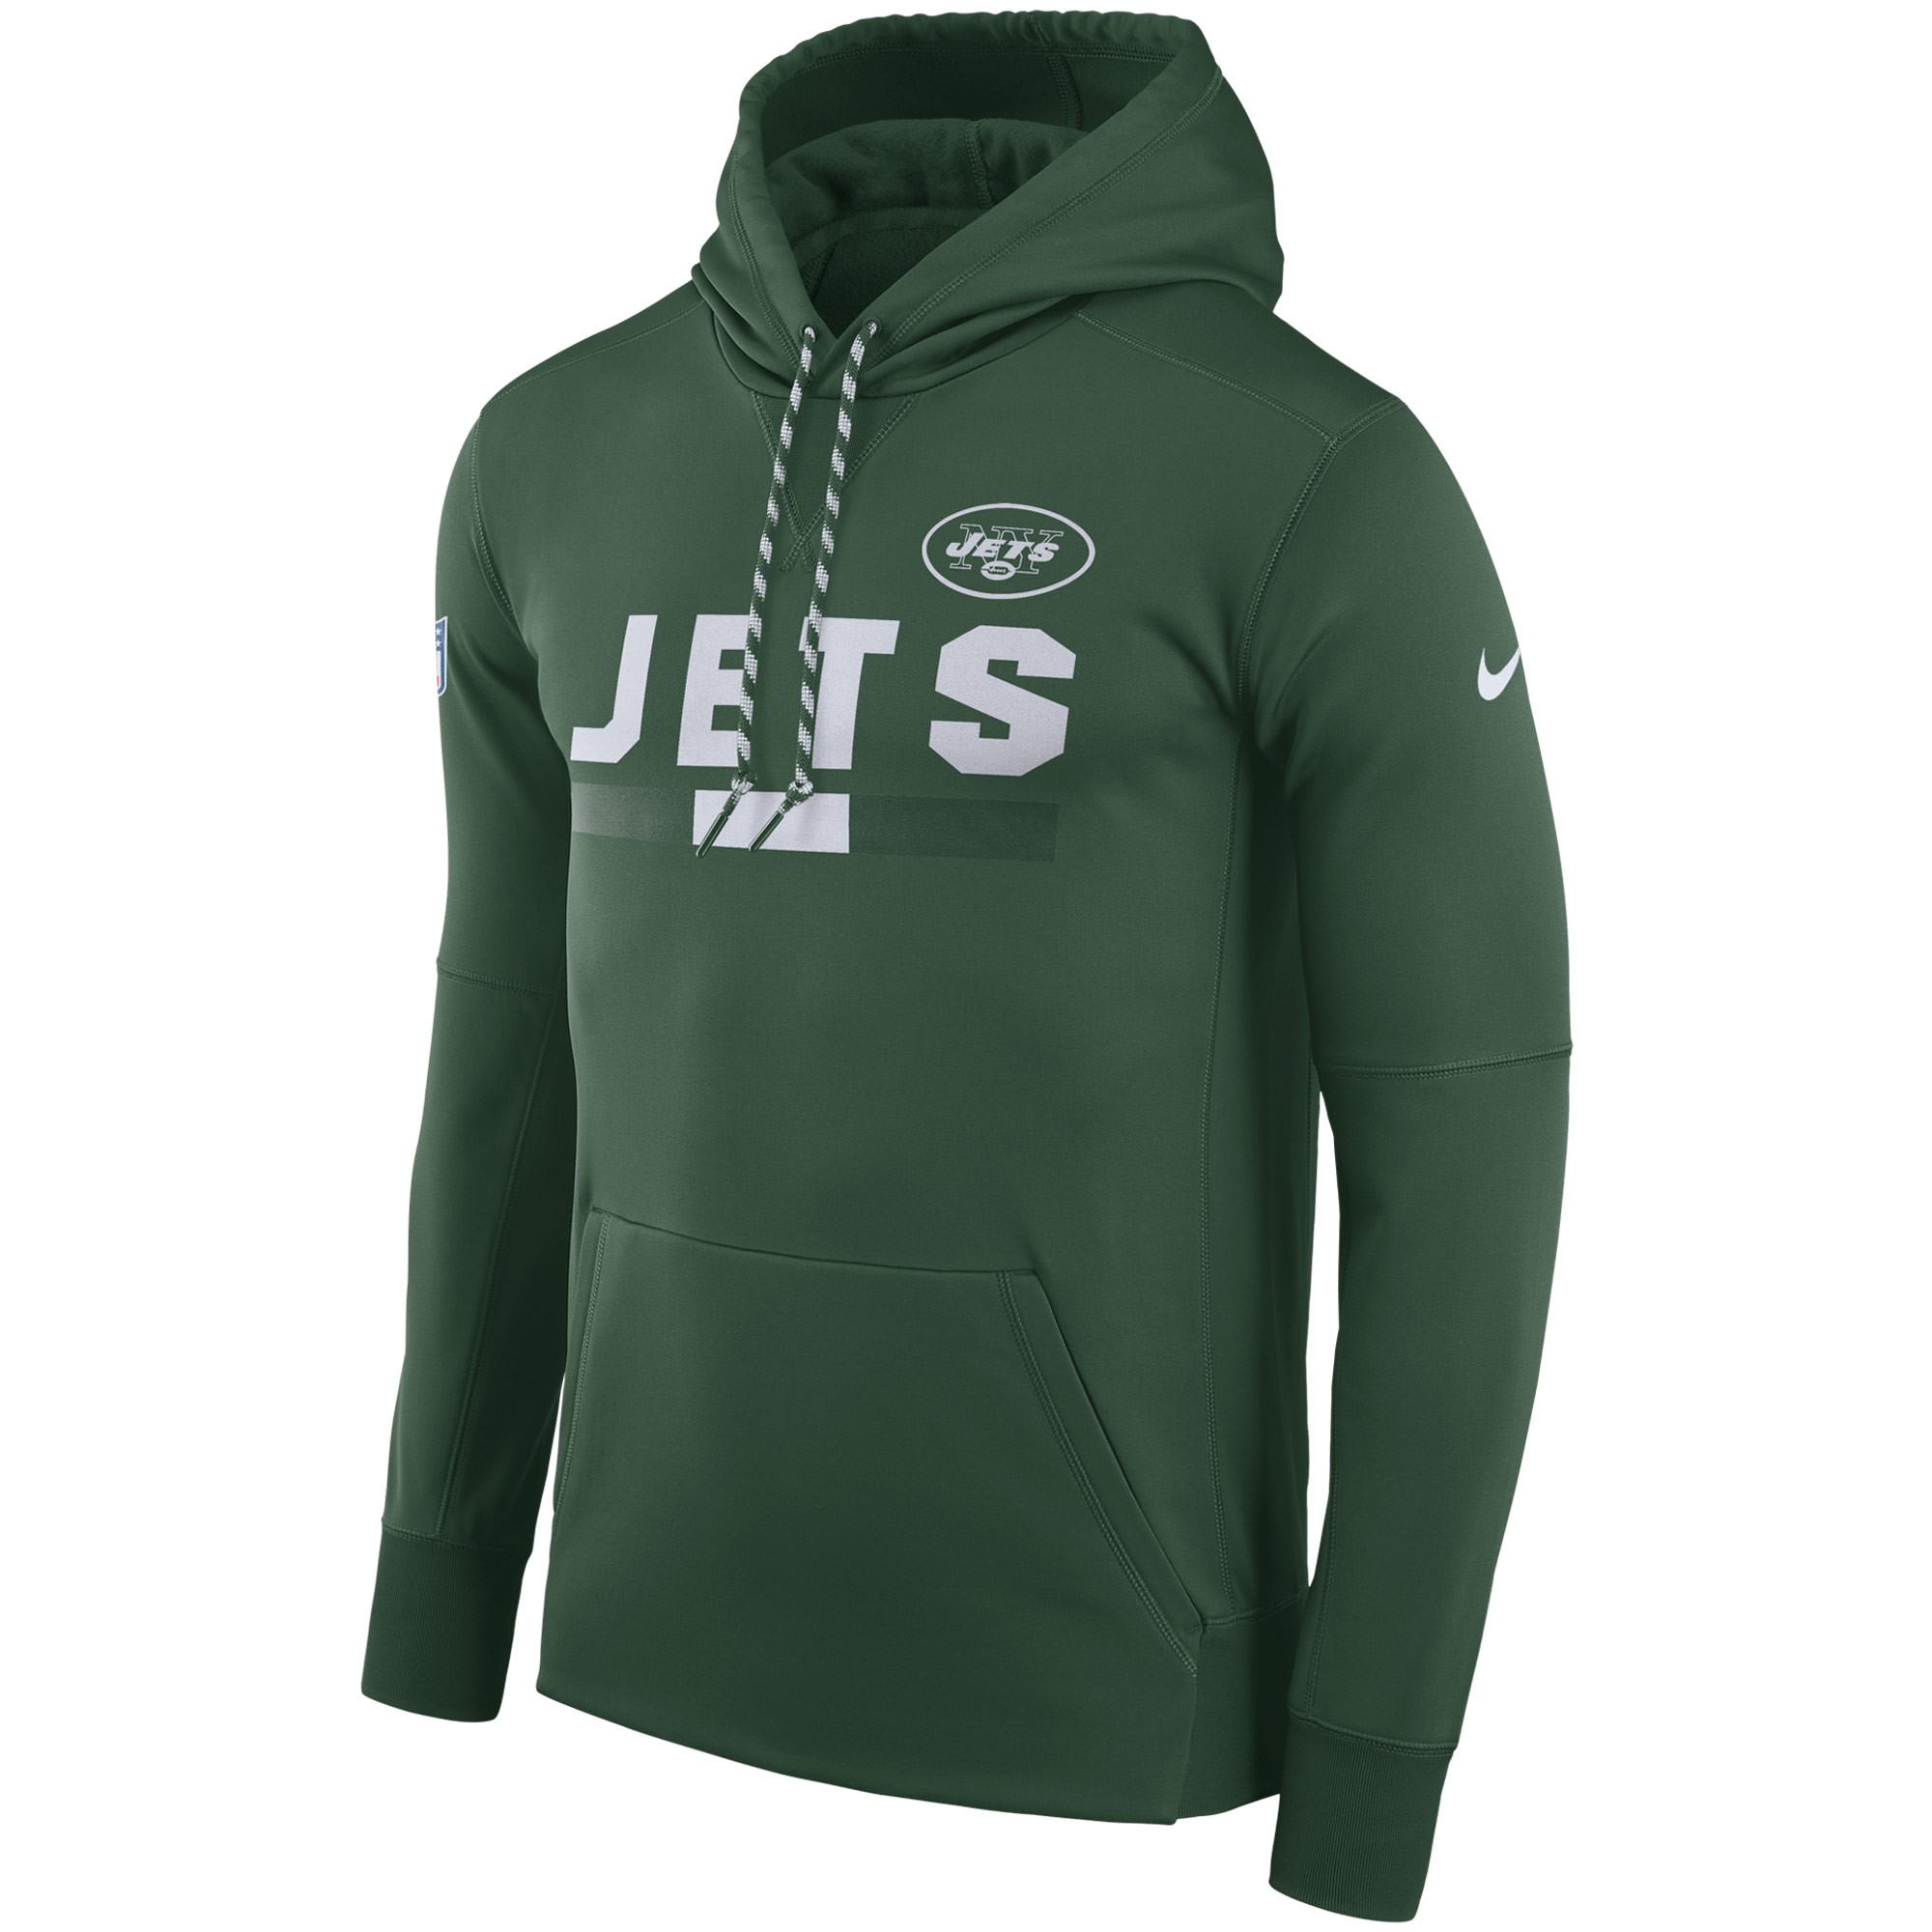 NFL Men New York Jets Nike Green Sideline ThermaFit Performance PO Hoodie->chicago bears->NFL Jersey